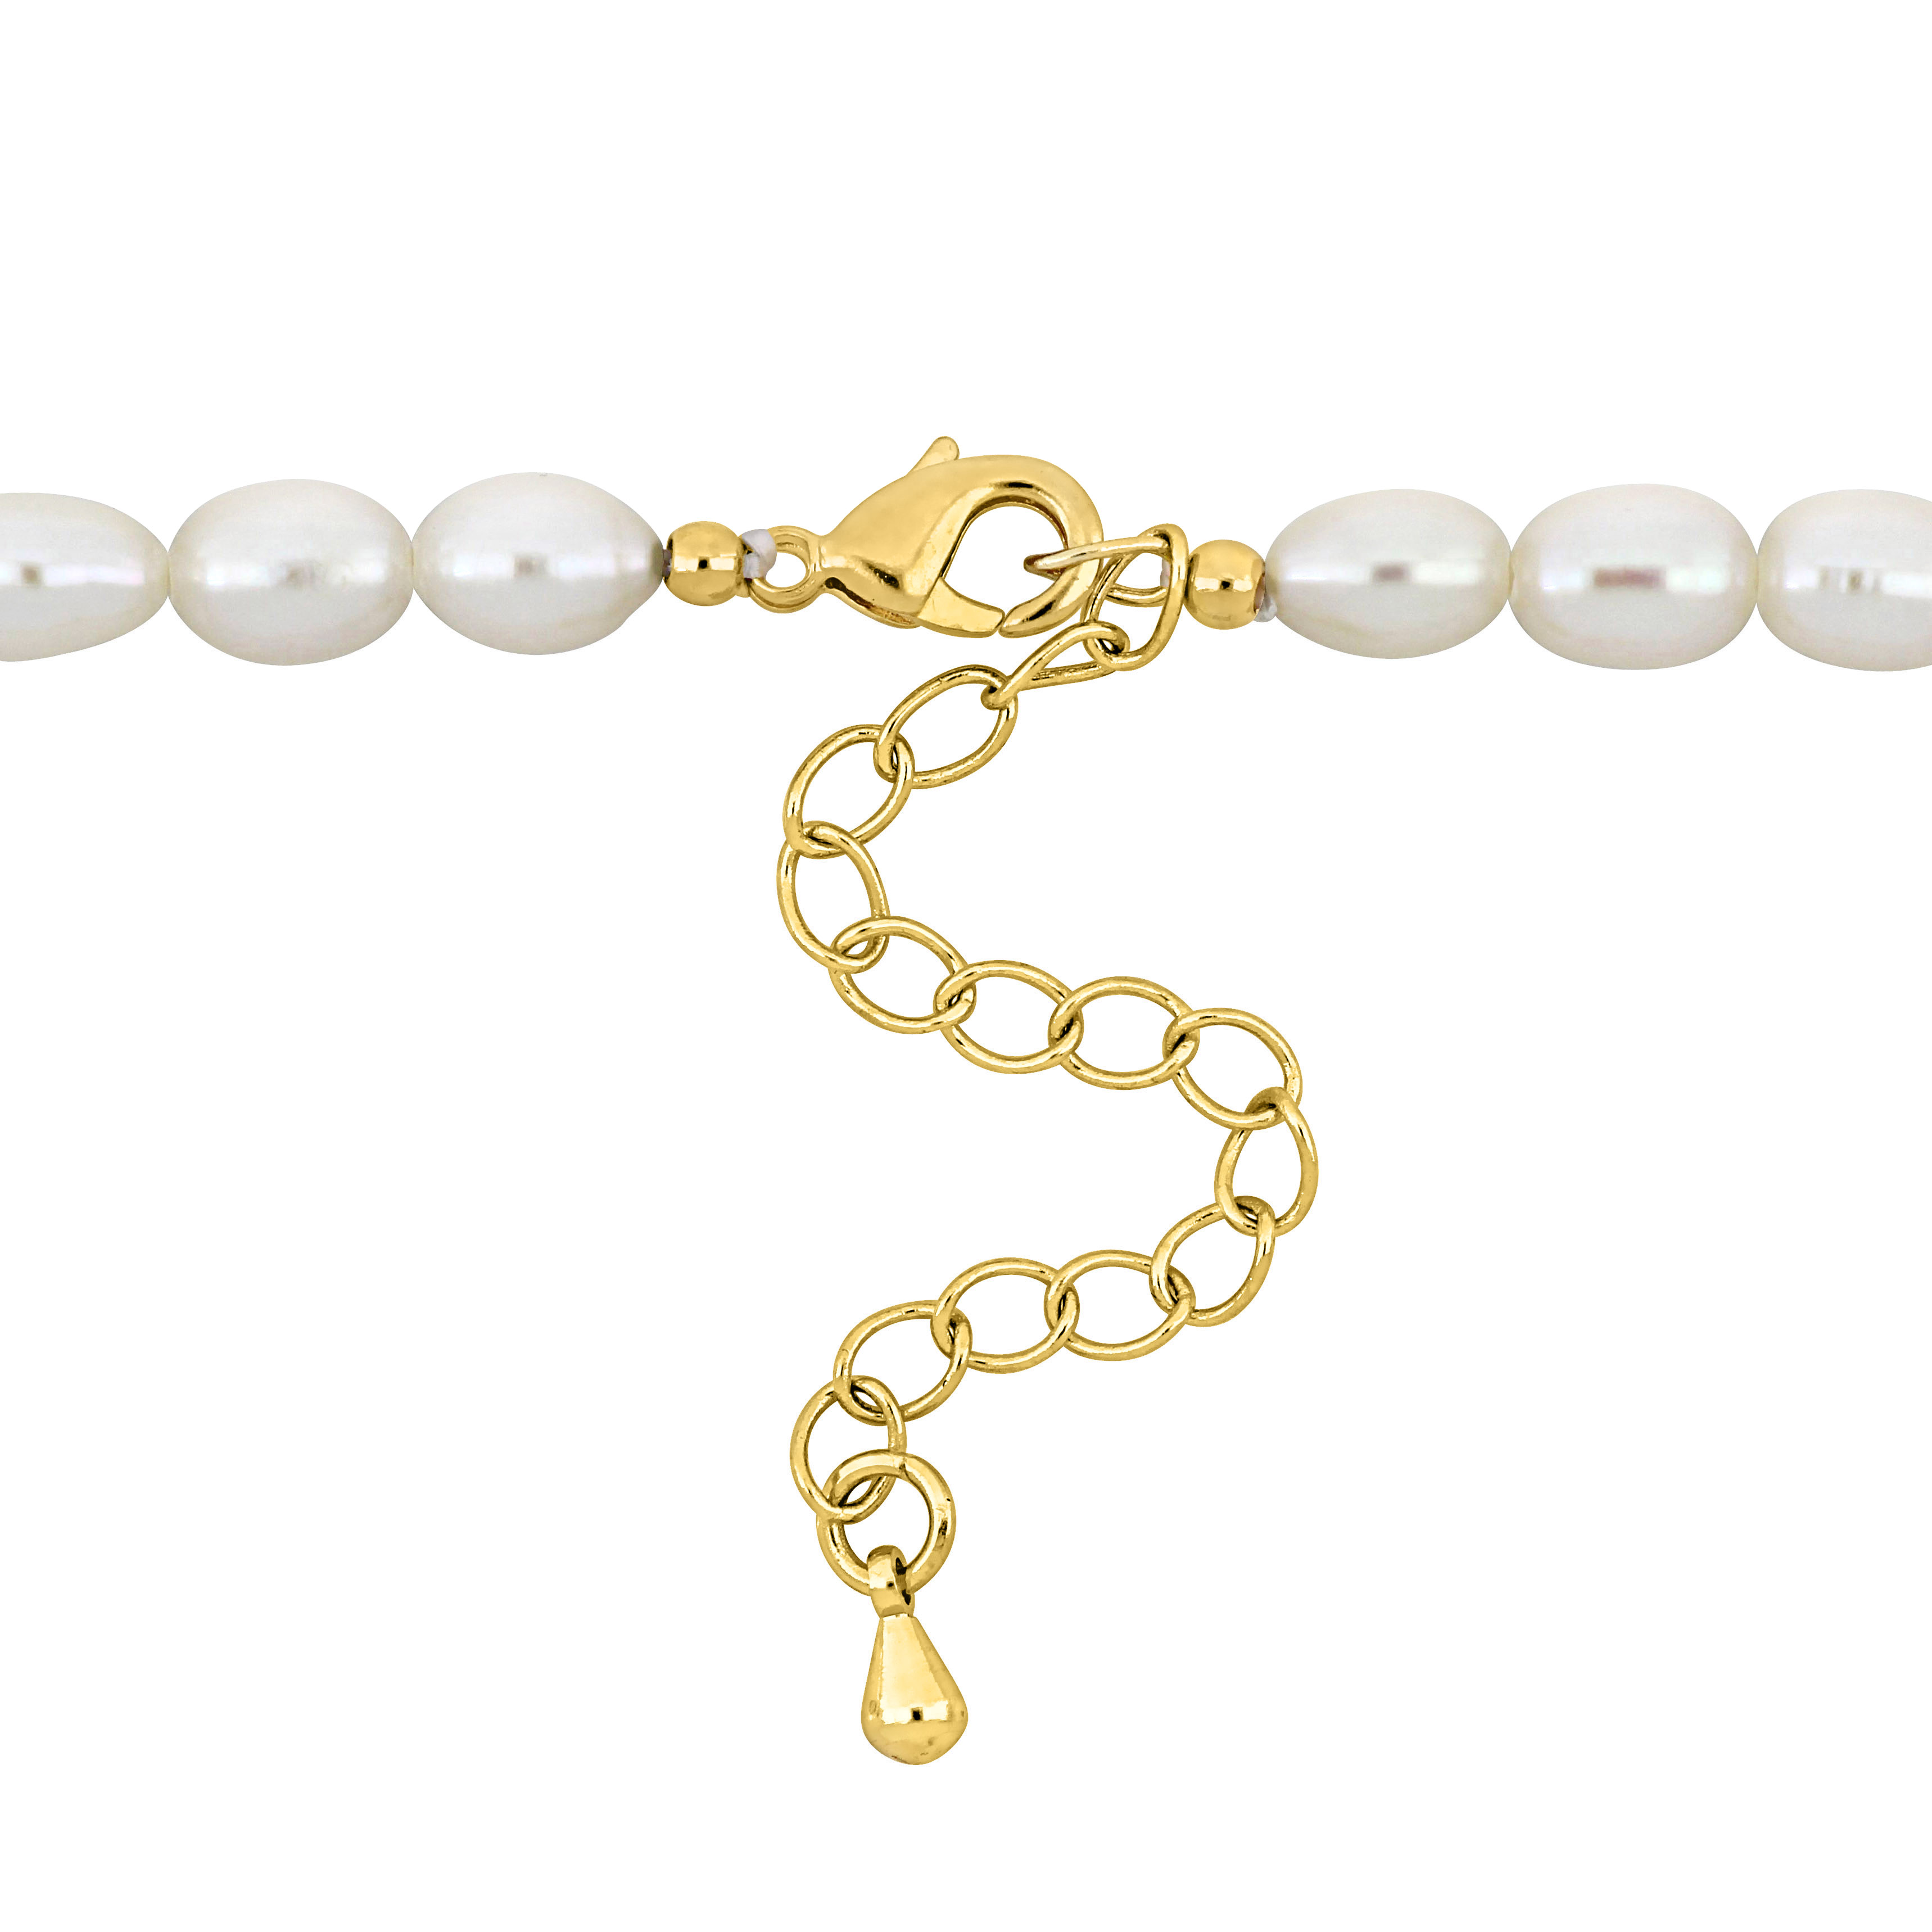 Cultured Freshwater Pearl Strand Necklace with Gold-tone Lobster Clasp - 15.5 in